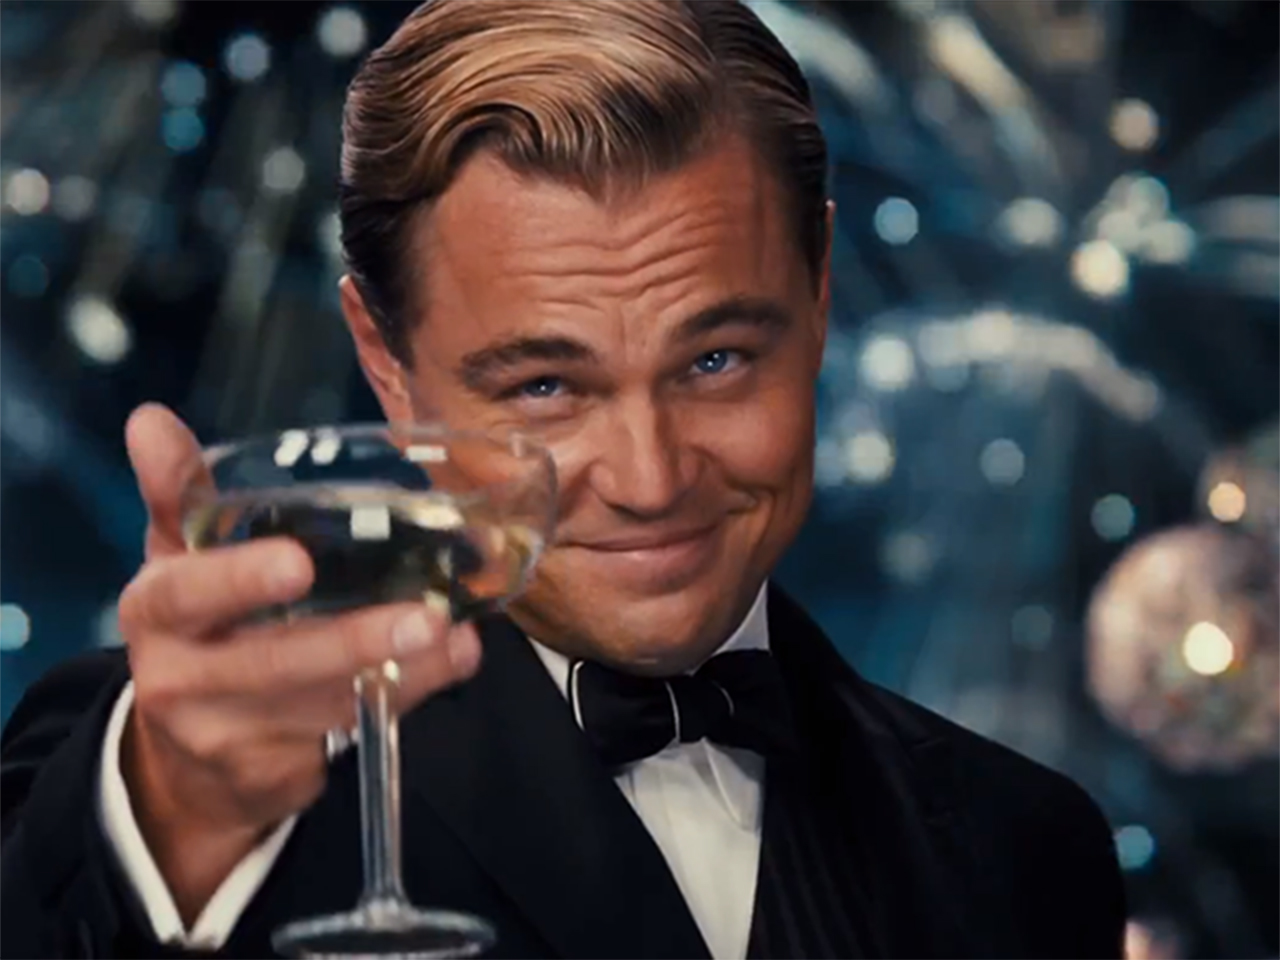 High Quality DiCaprio toasting Blank Meme Template